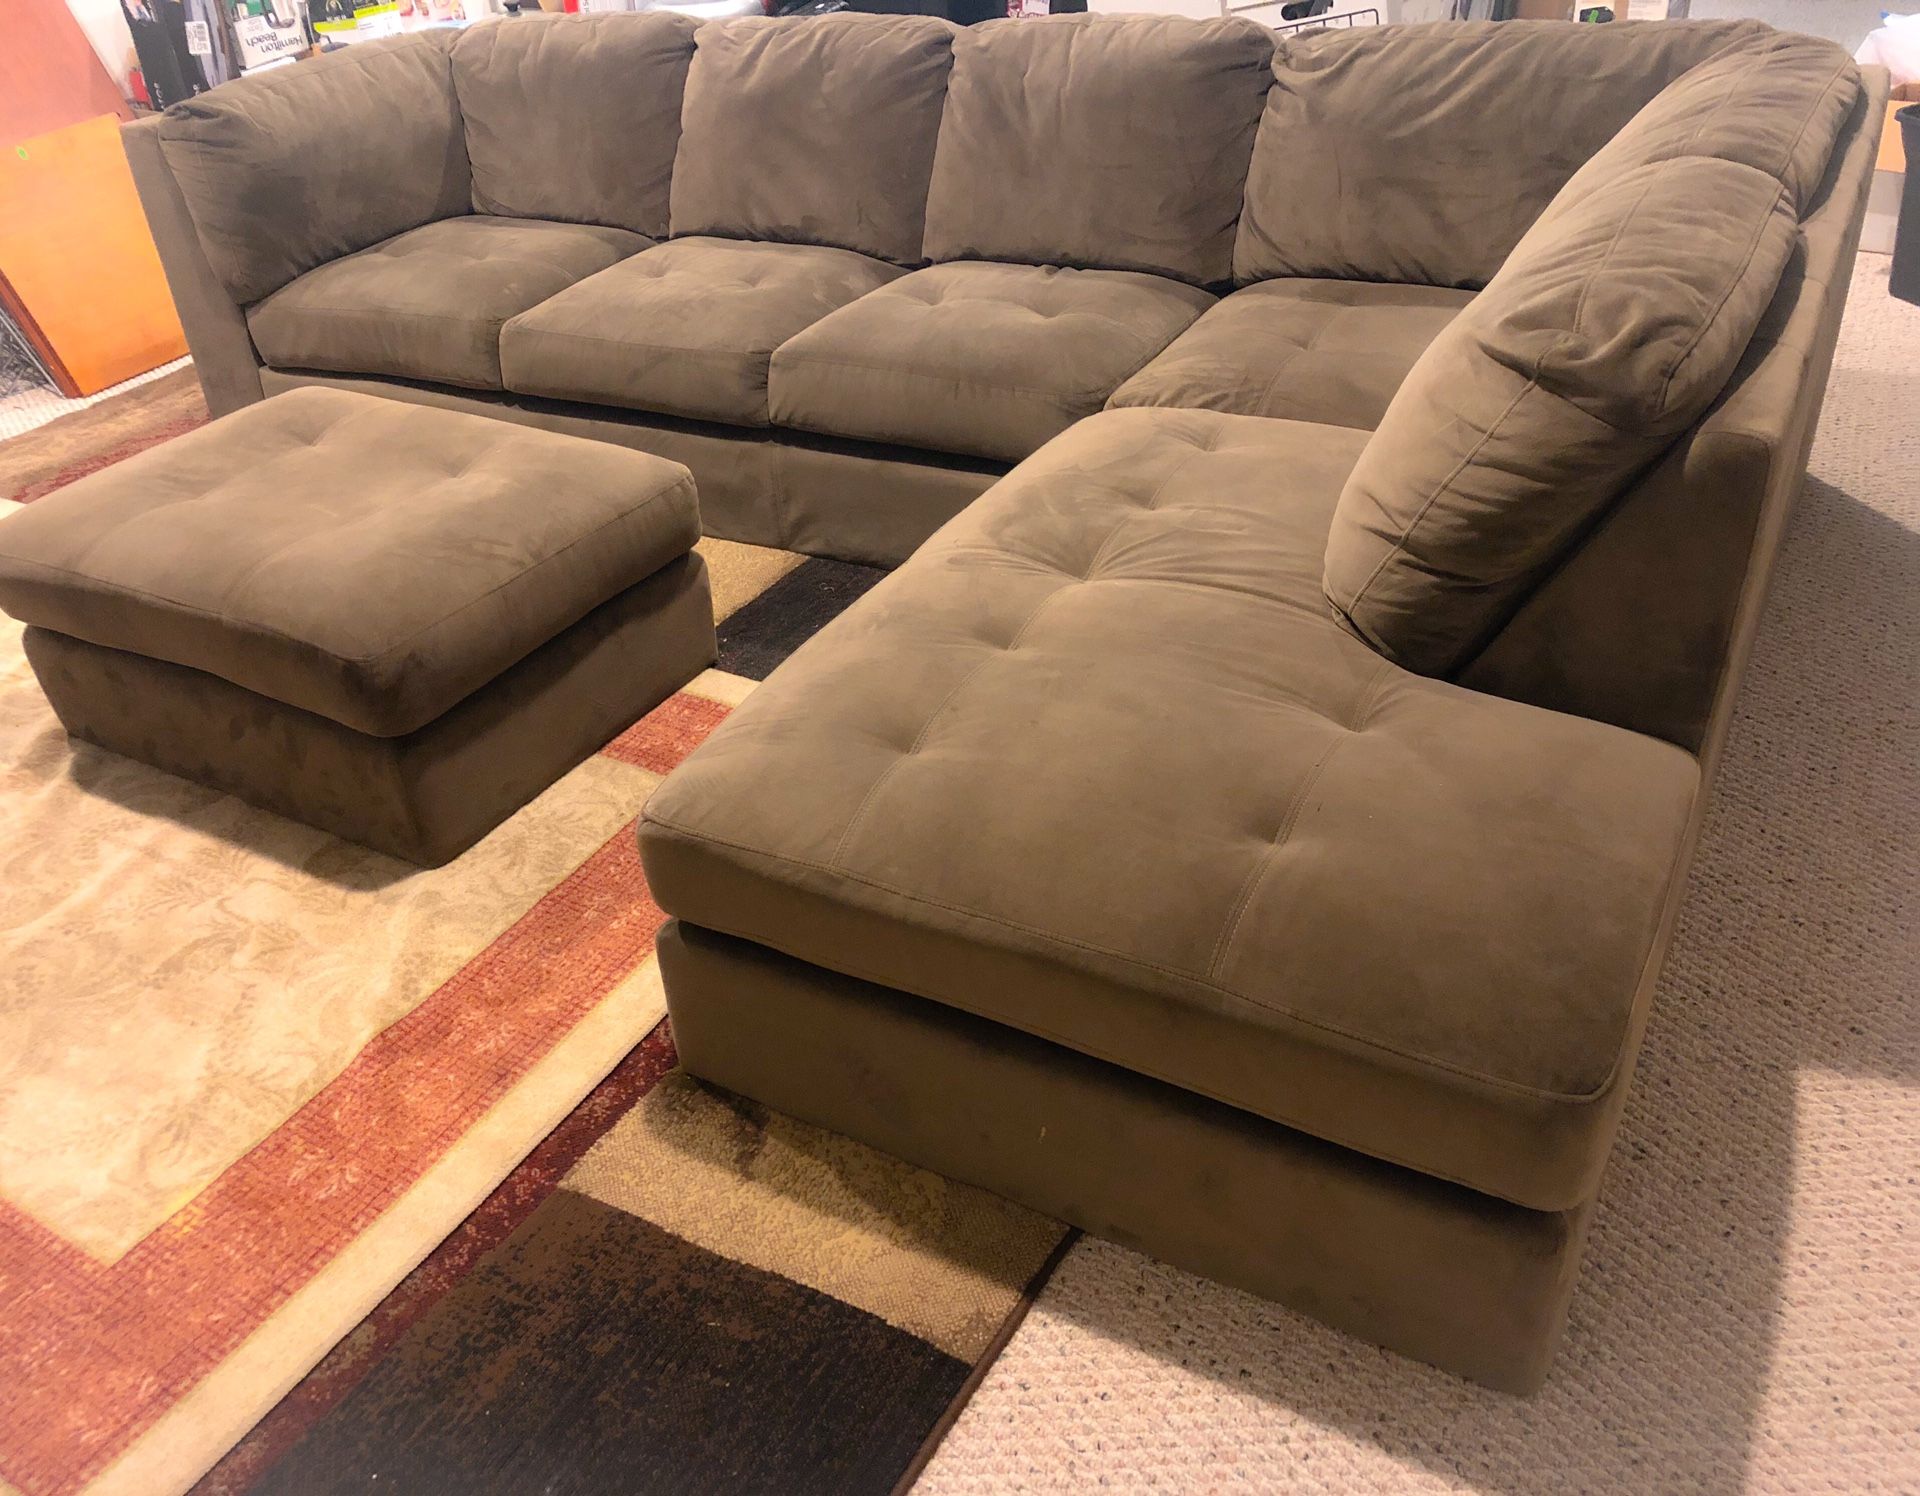 Like new fabric sectional sofa / couch with ottoman bought from Costco